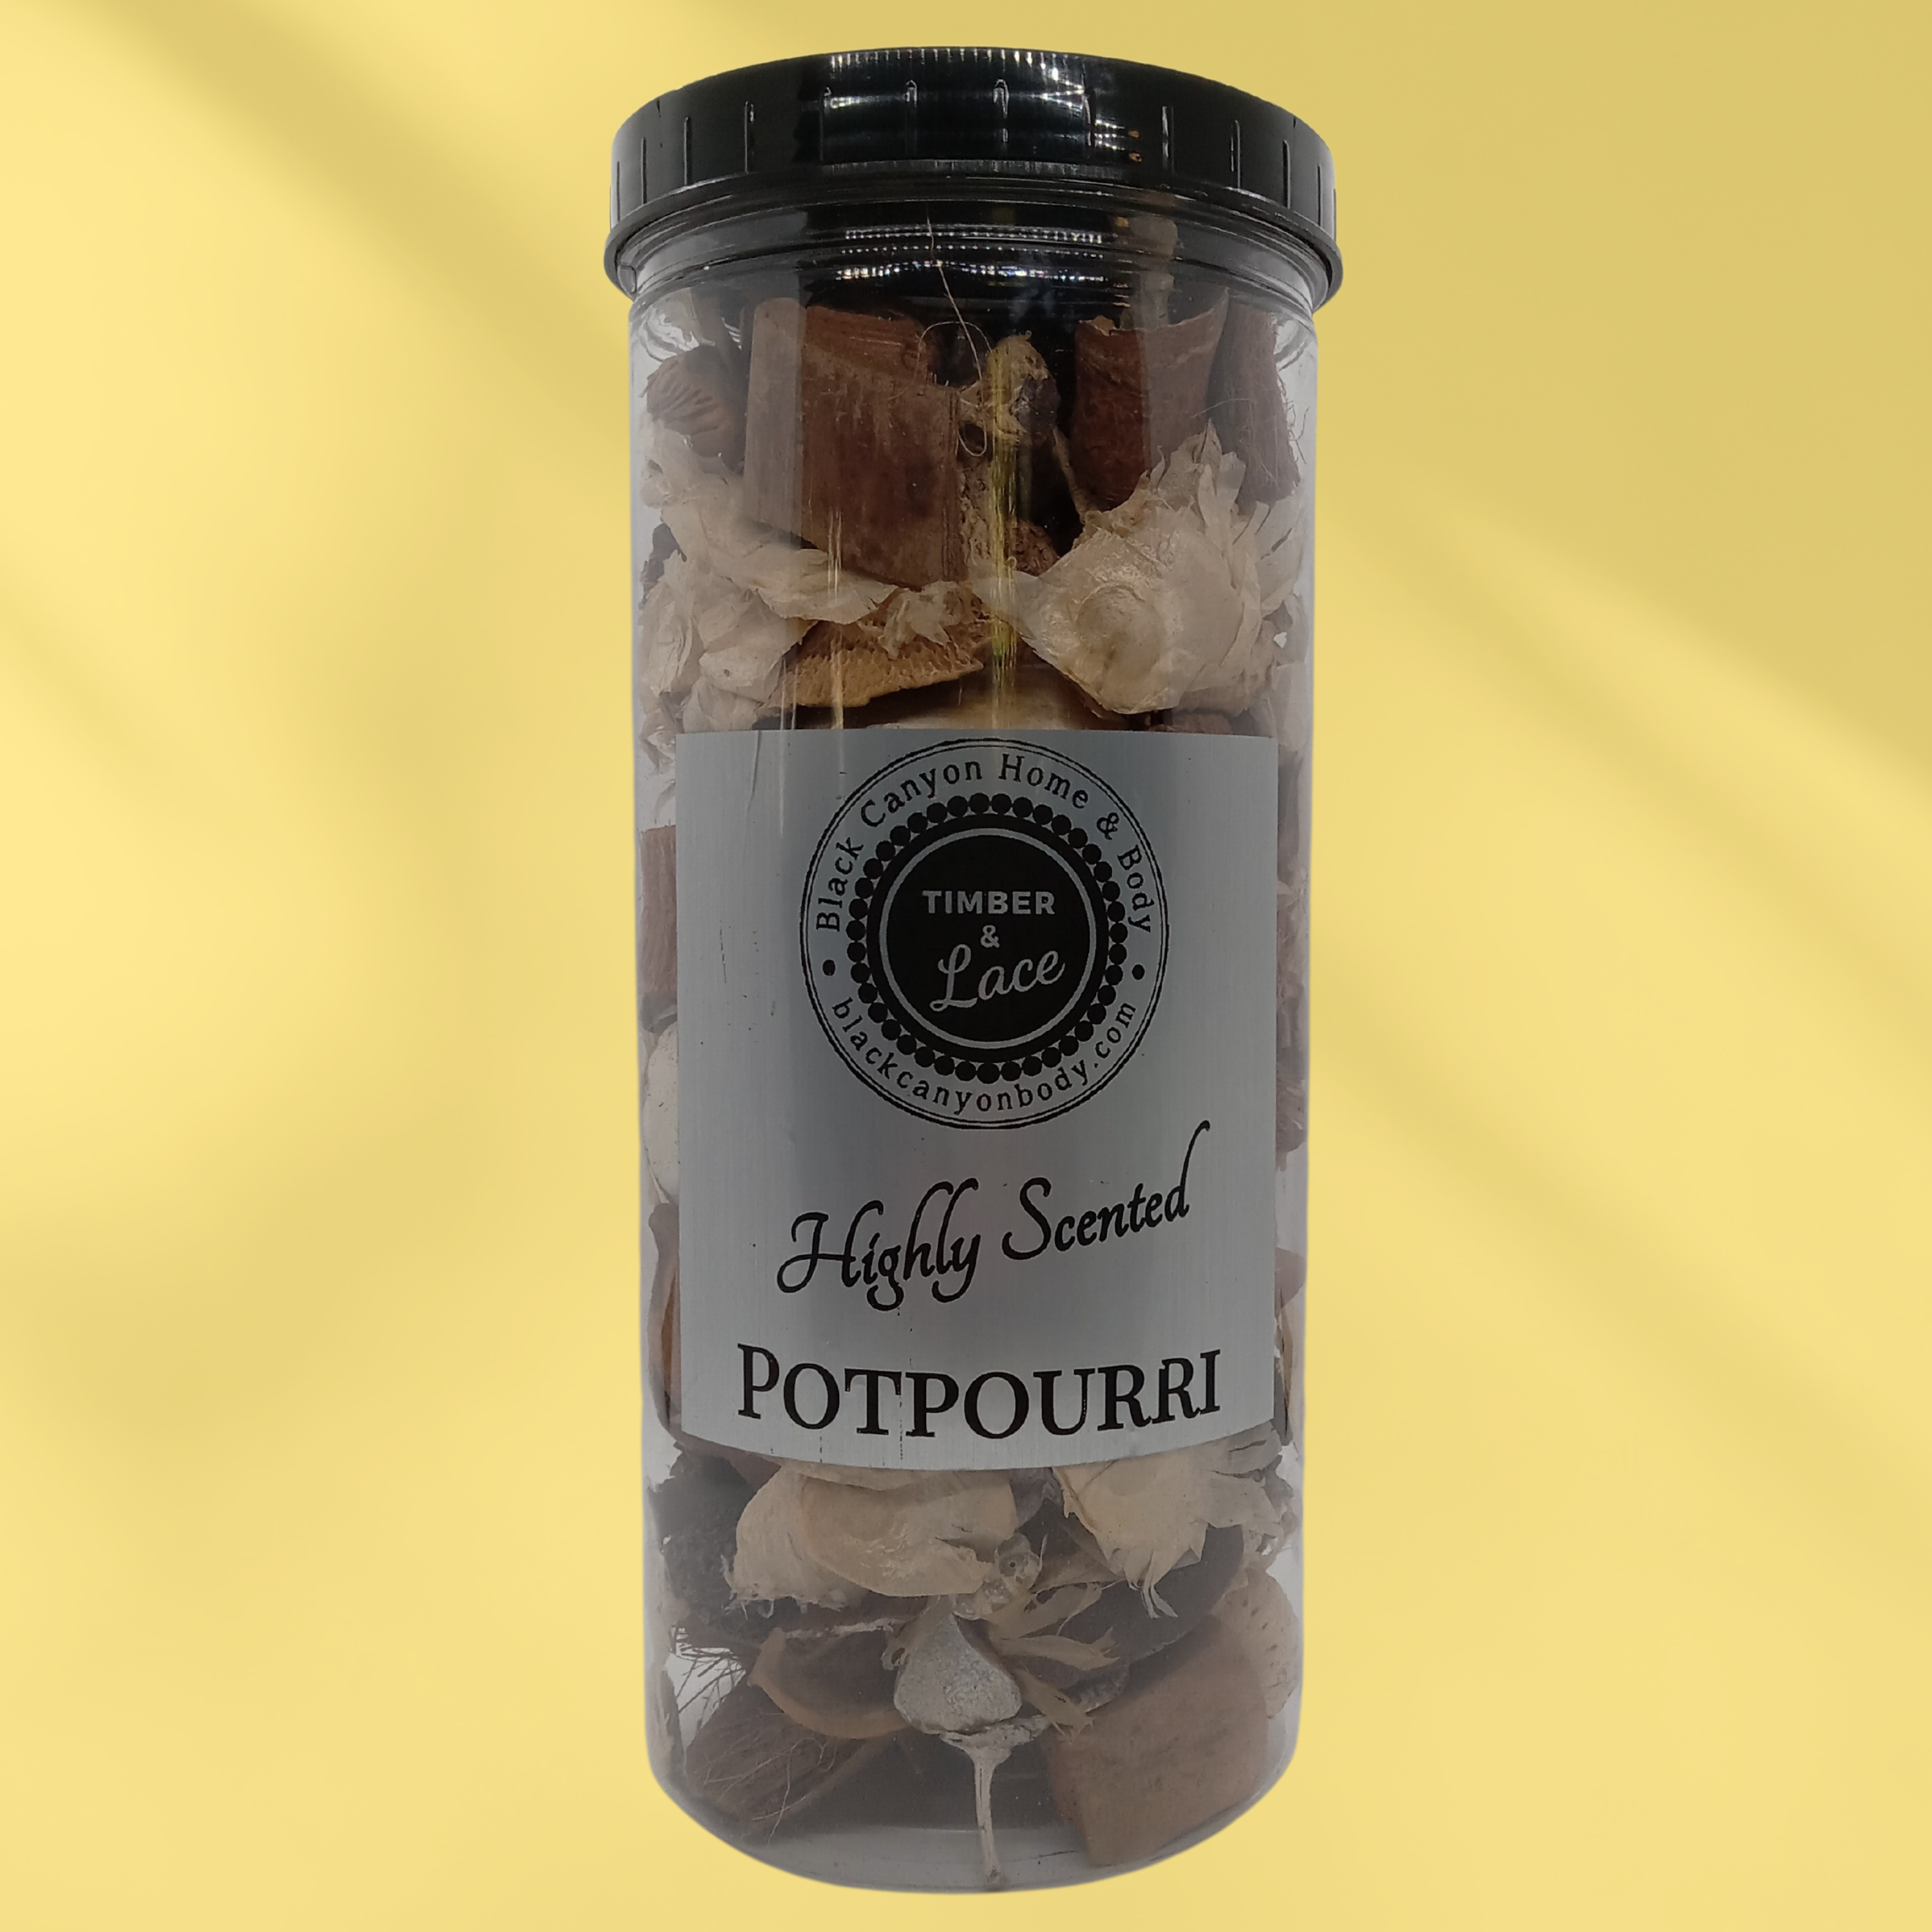 Timber & Lace Butterscotch Syrup Scented Potpourri